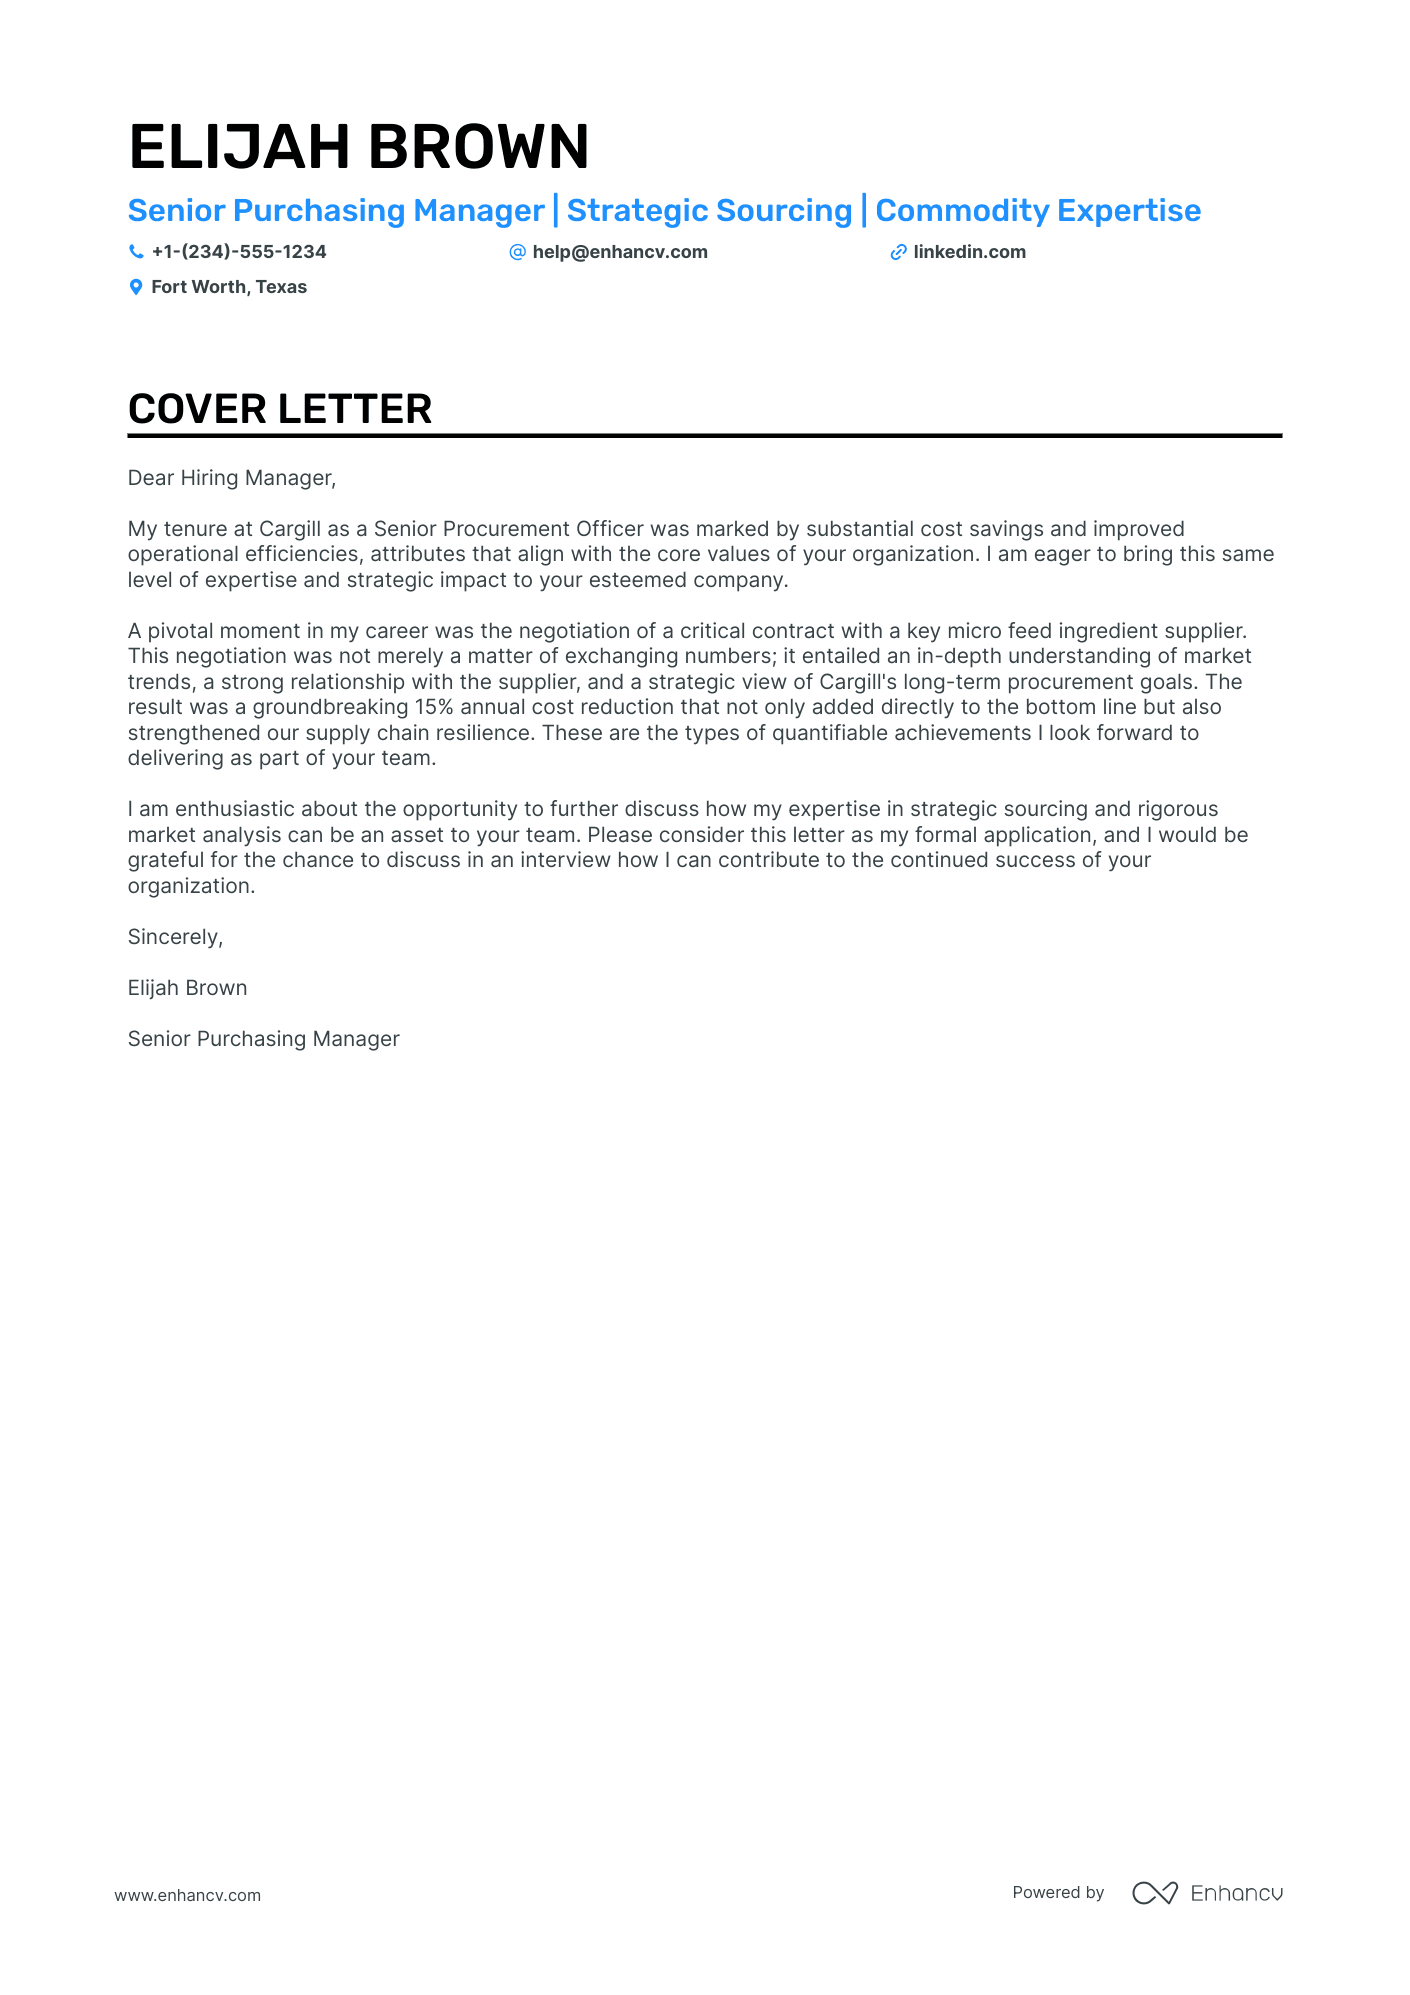 Sourcing Manager cover letter